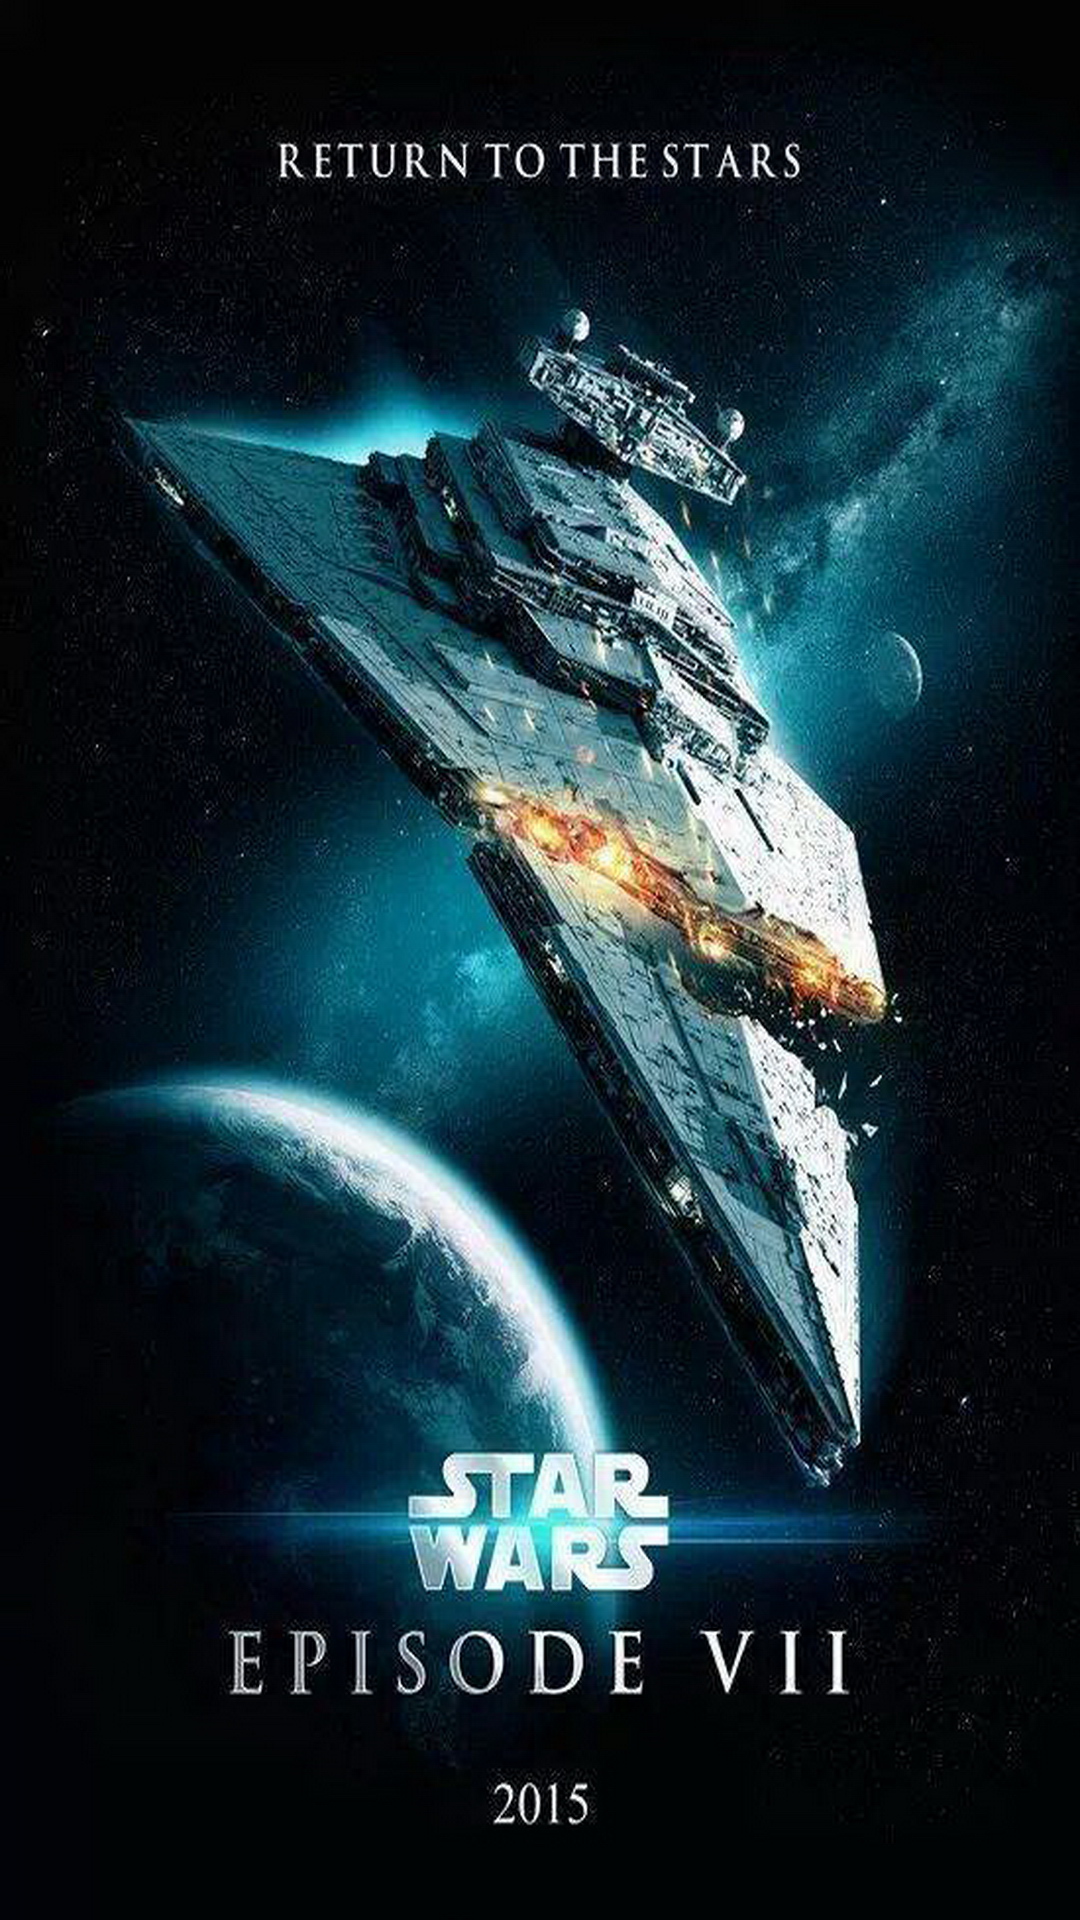  of Epic Star Wars Iphone Wallpaper by HD Wallpapers   SWCROWN 1080x1920